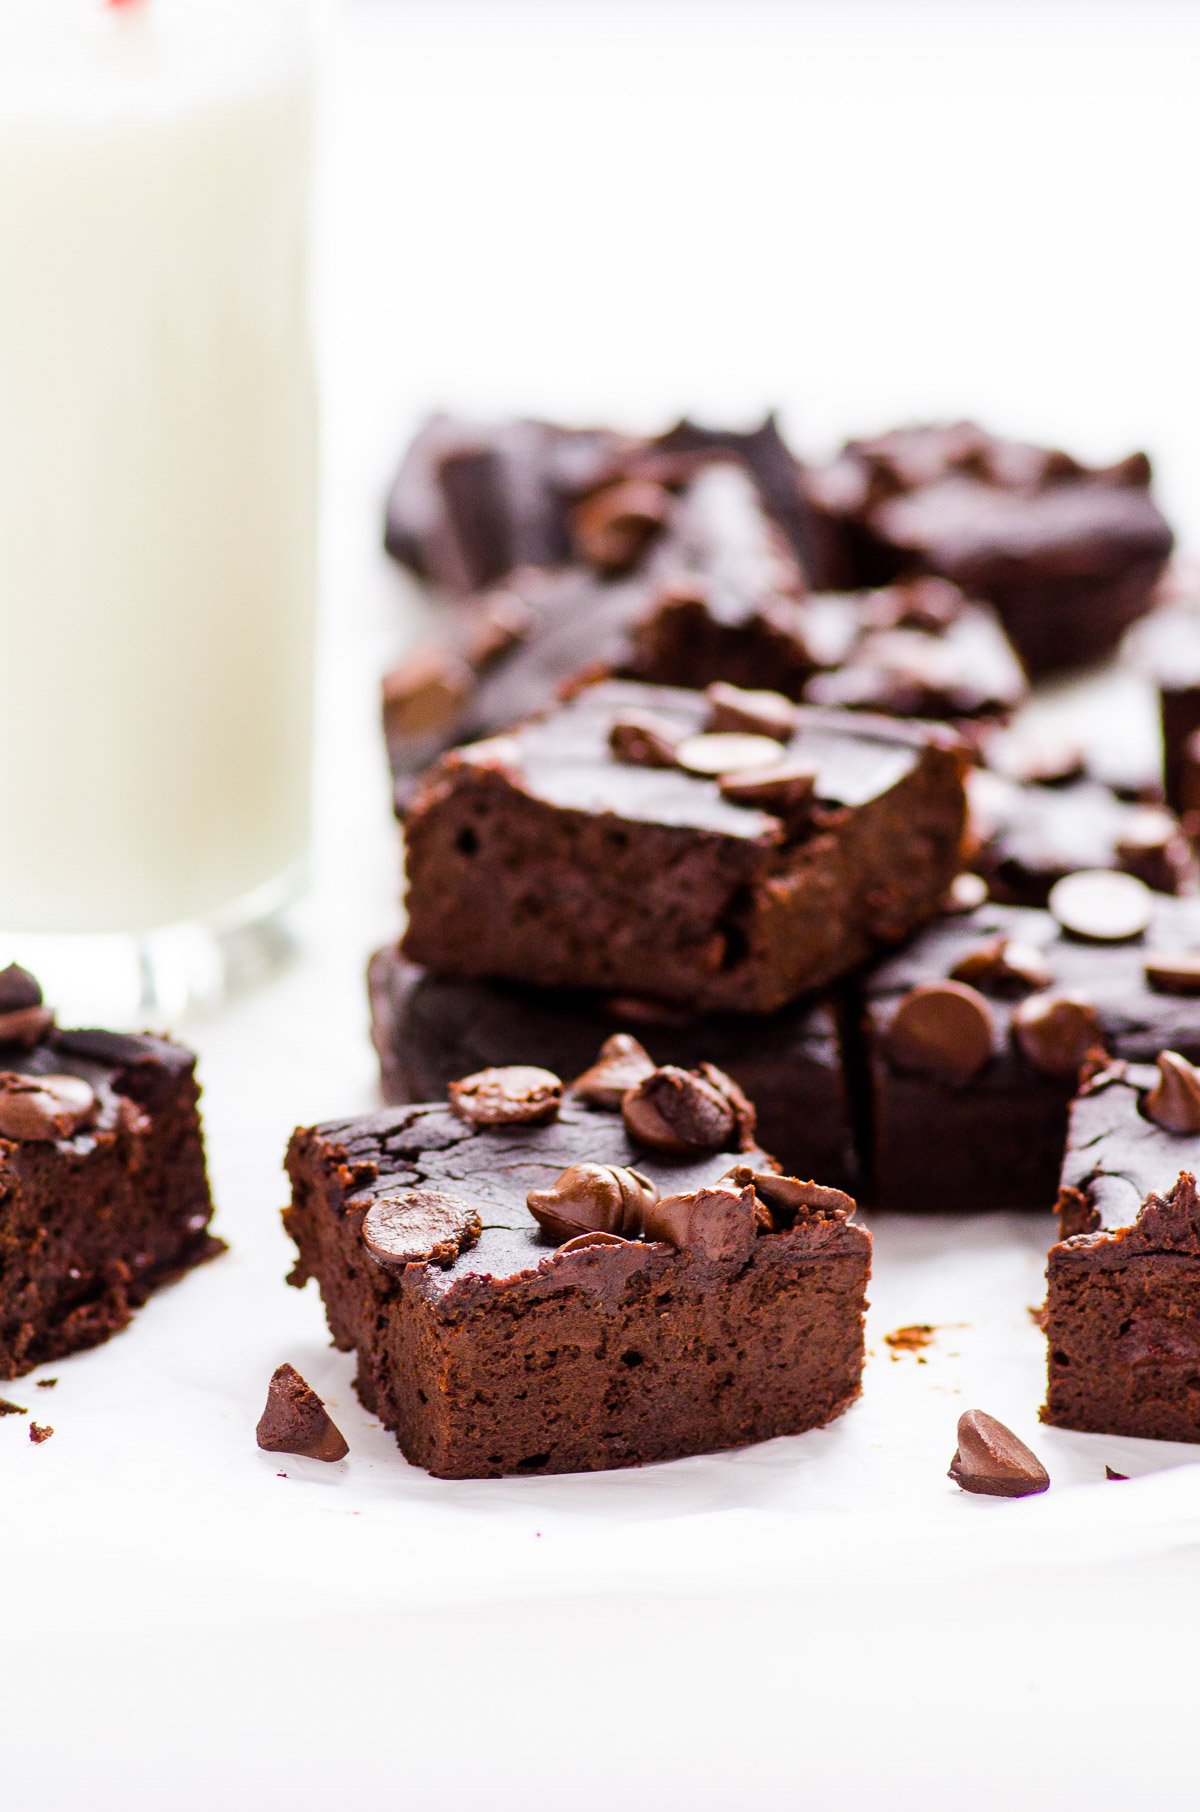 Black bean brownies cut into squares topped with chocolate chips.